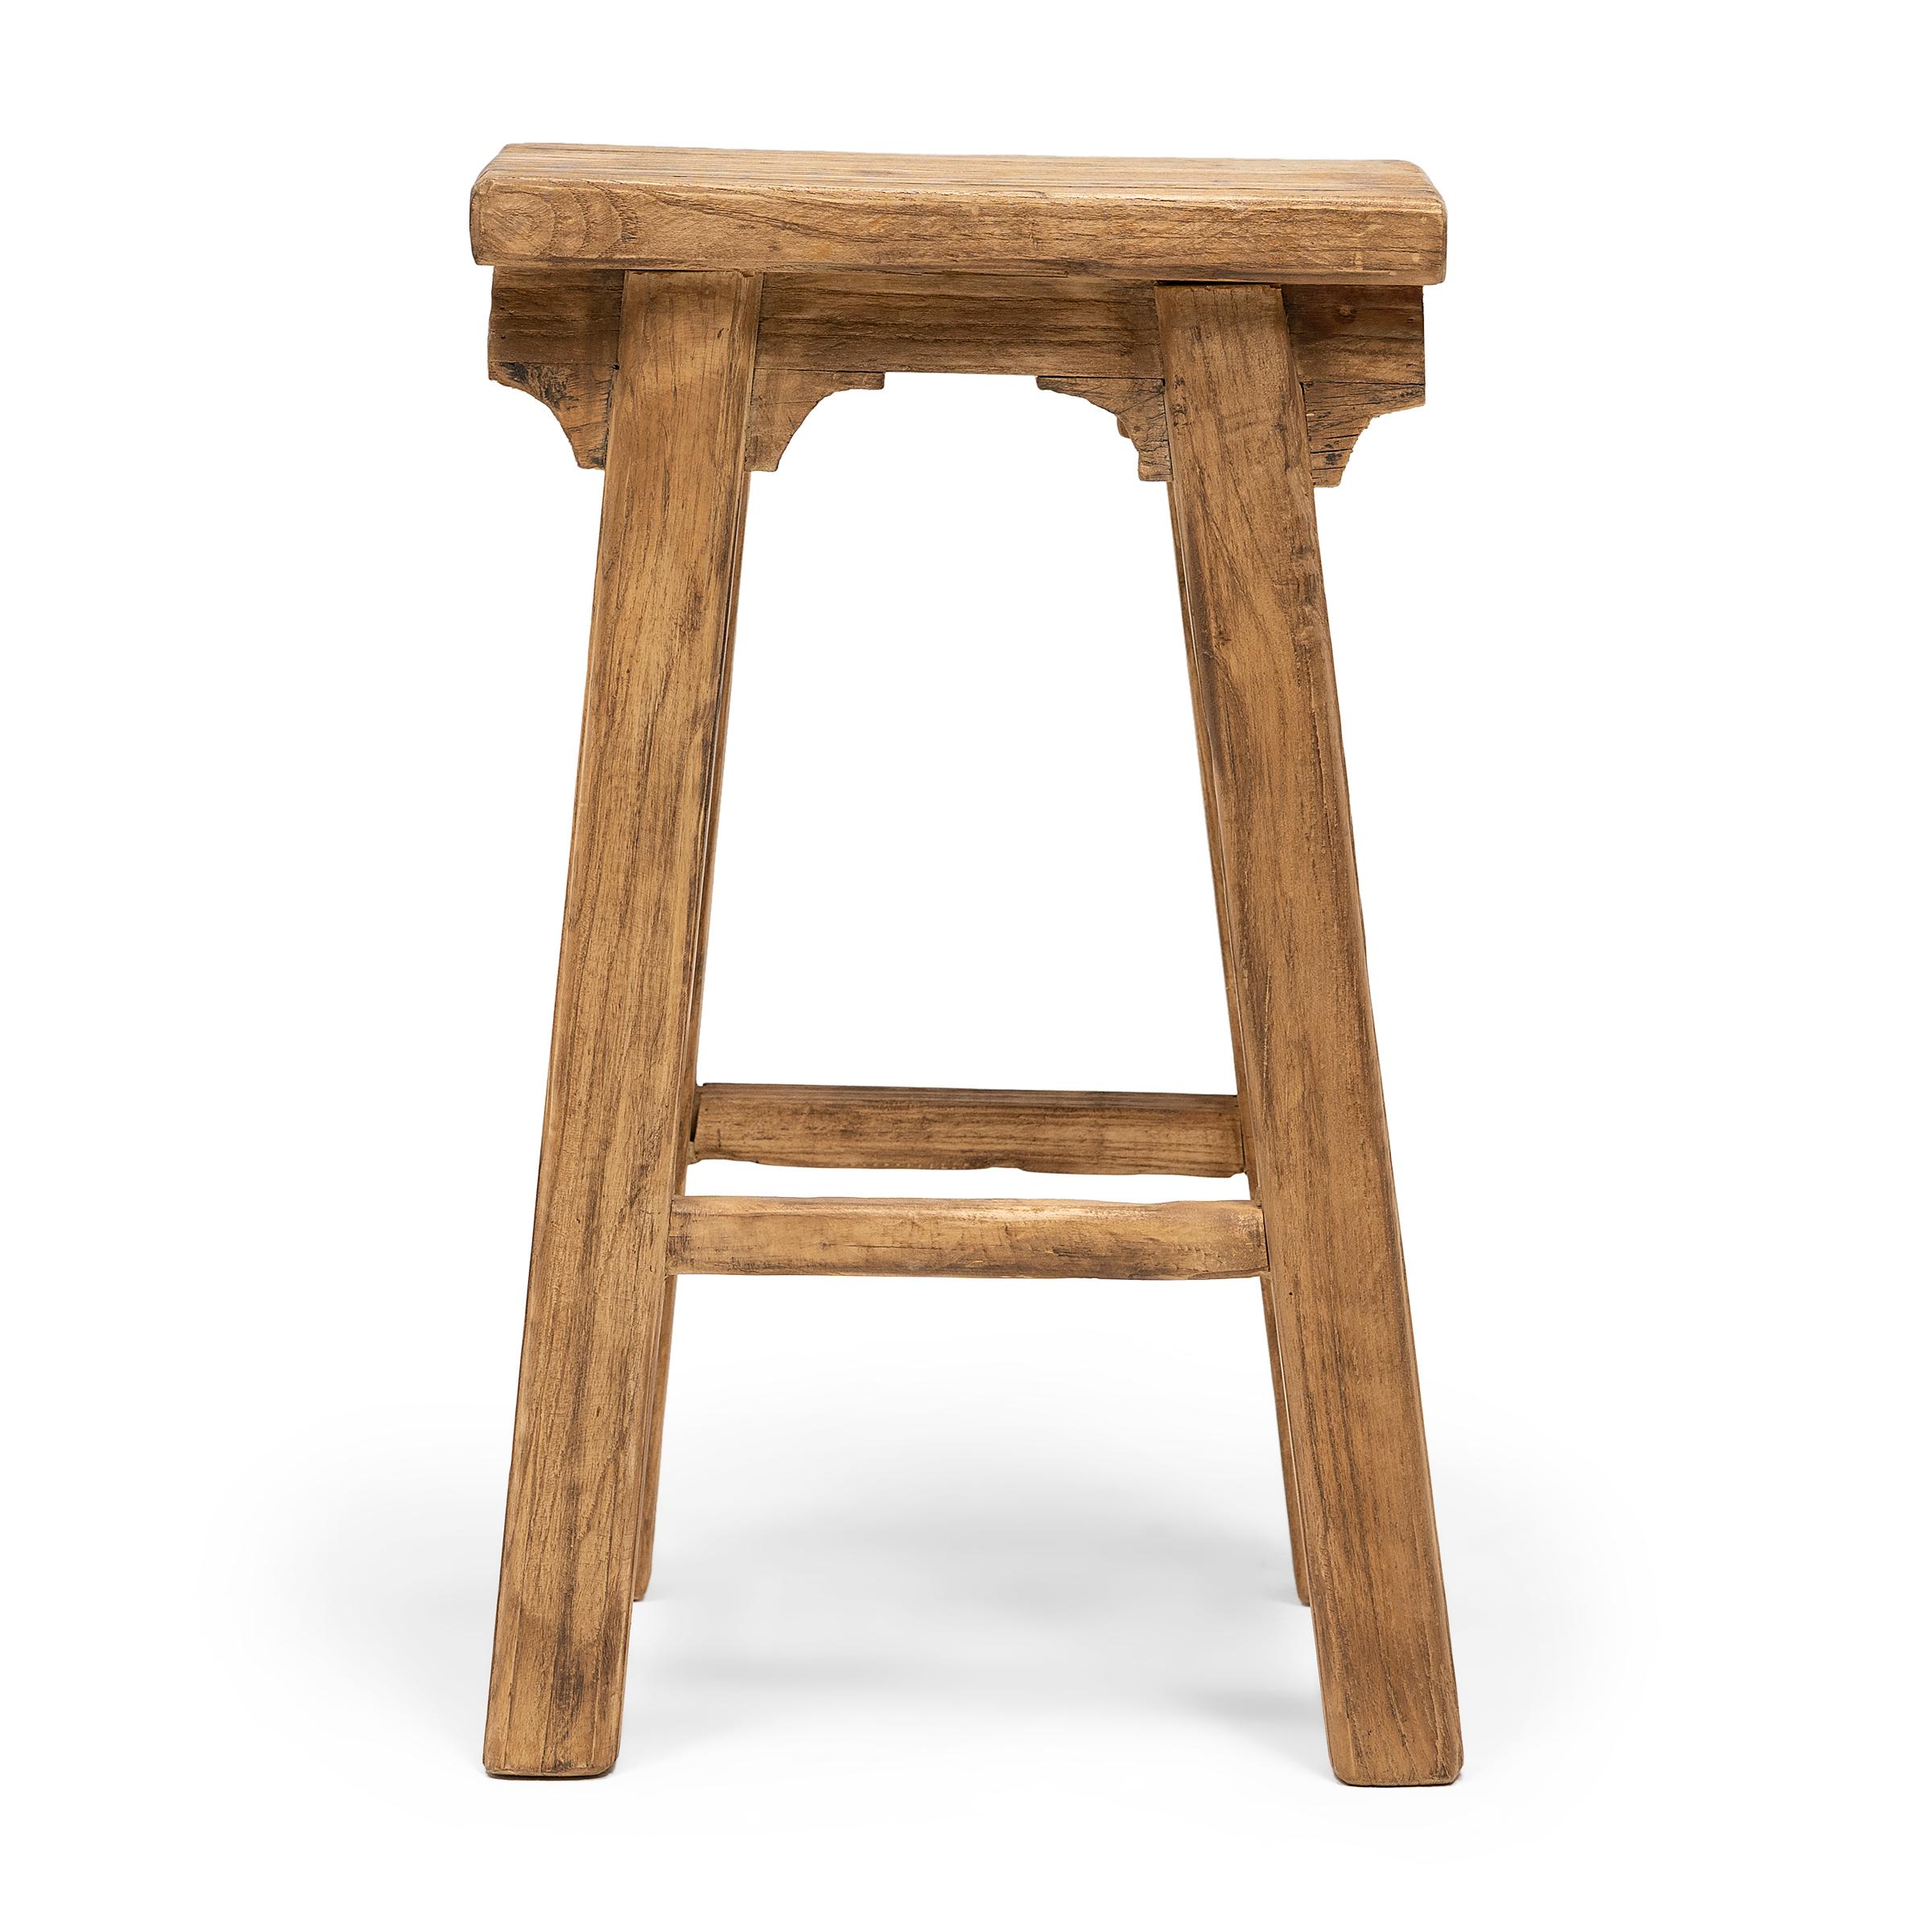 This provincial stool is artisan-crafted in the style of traditional Chinese courtyard stools typically used throughout a Qing dynasty home as versatile everyday seating. Made of reclaimed elmwood, the tapered stool features a narrow, rectangular